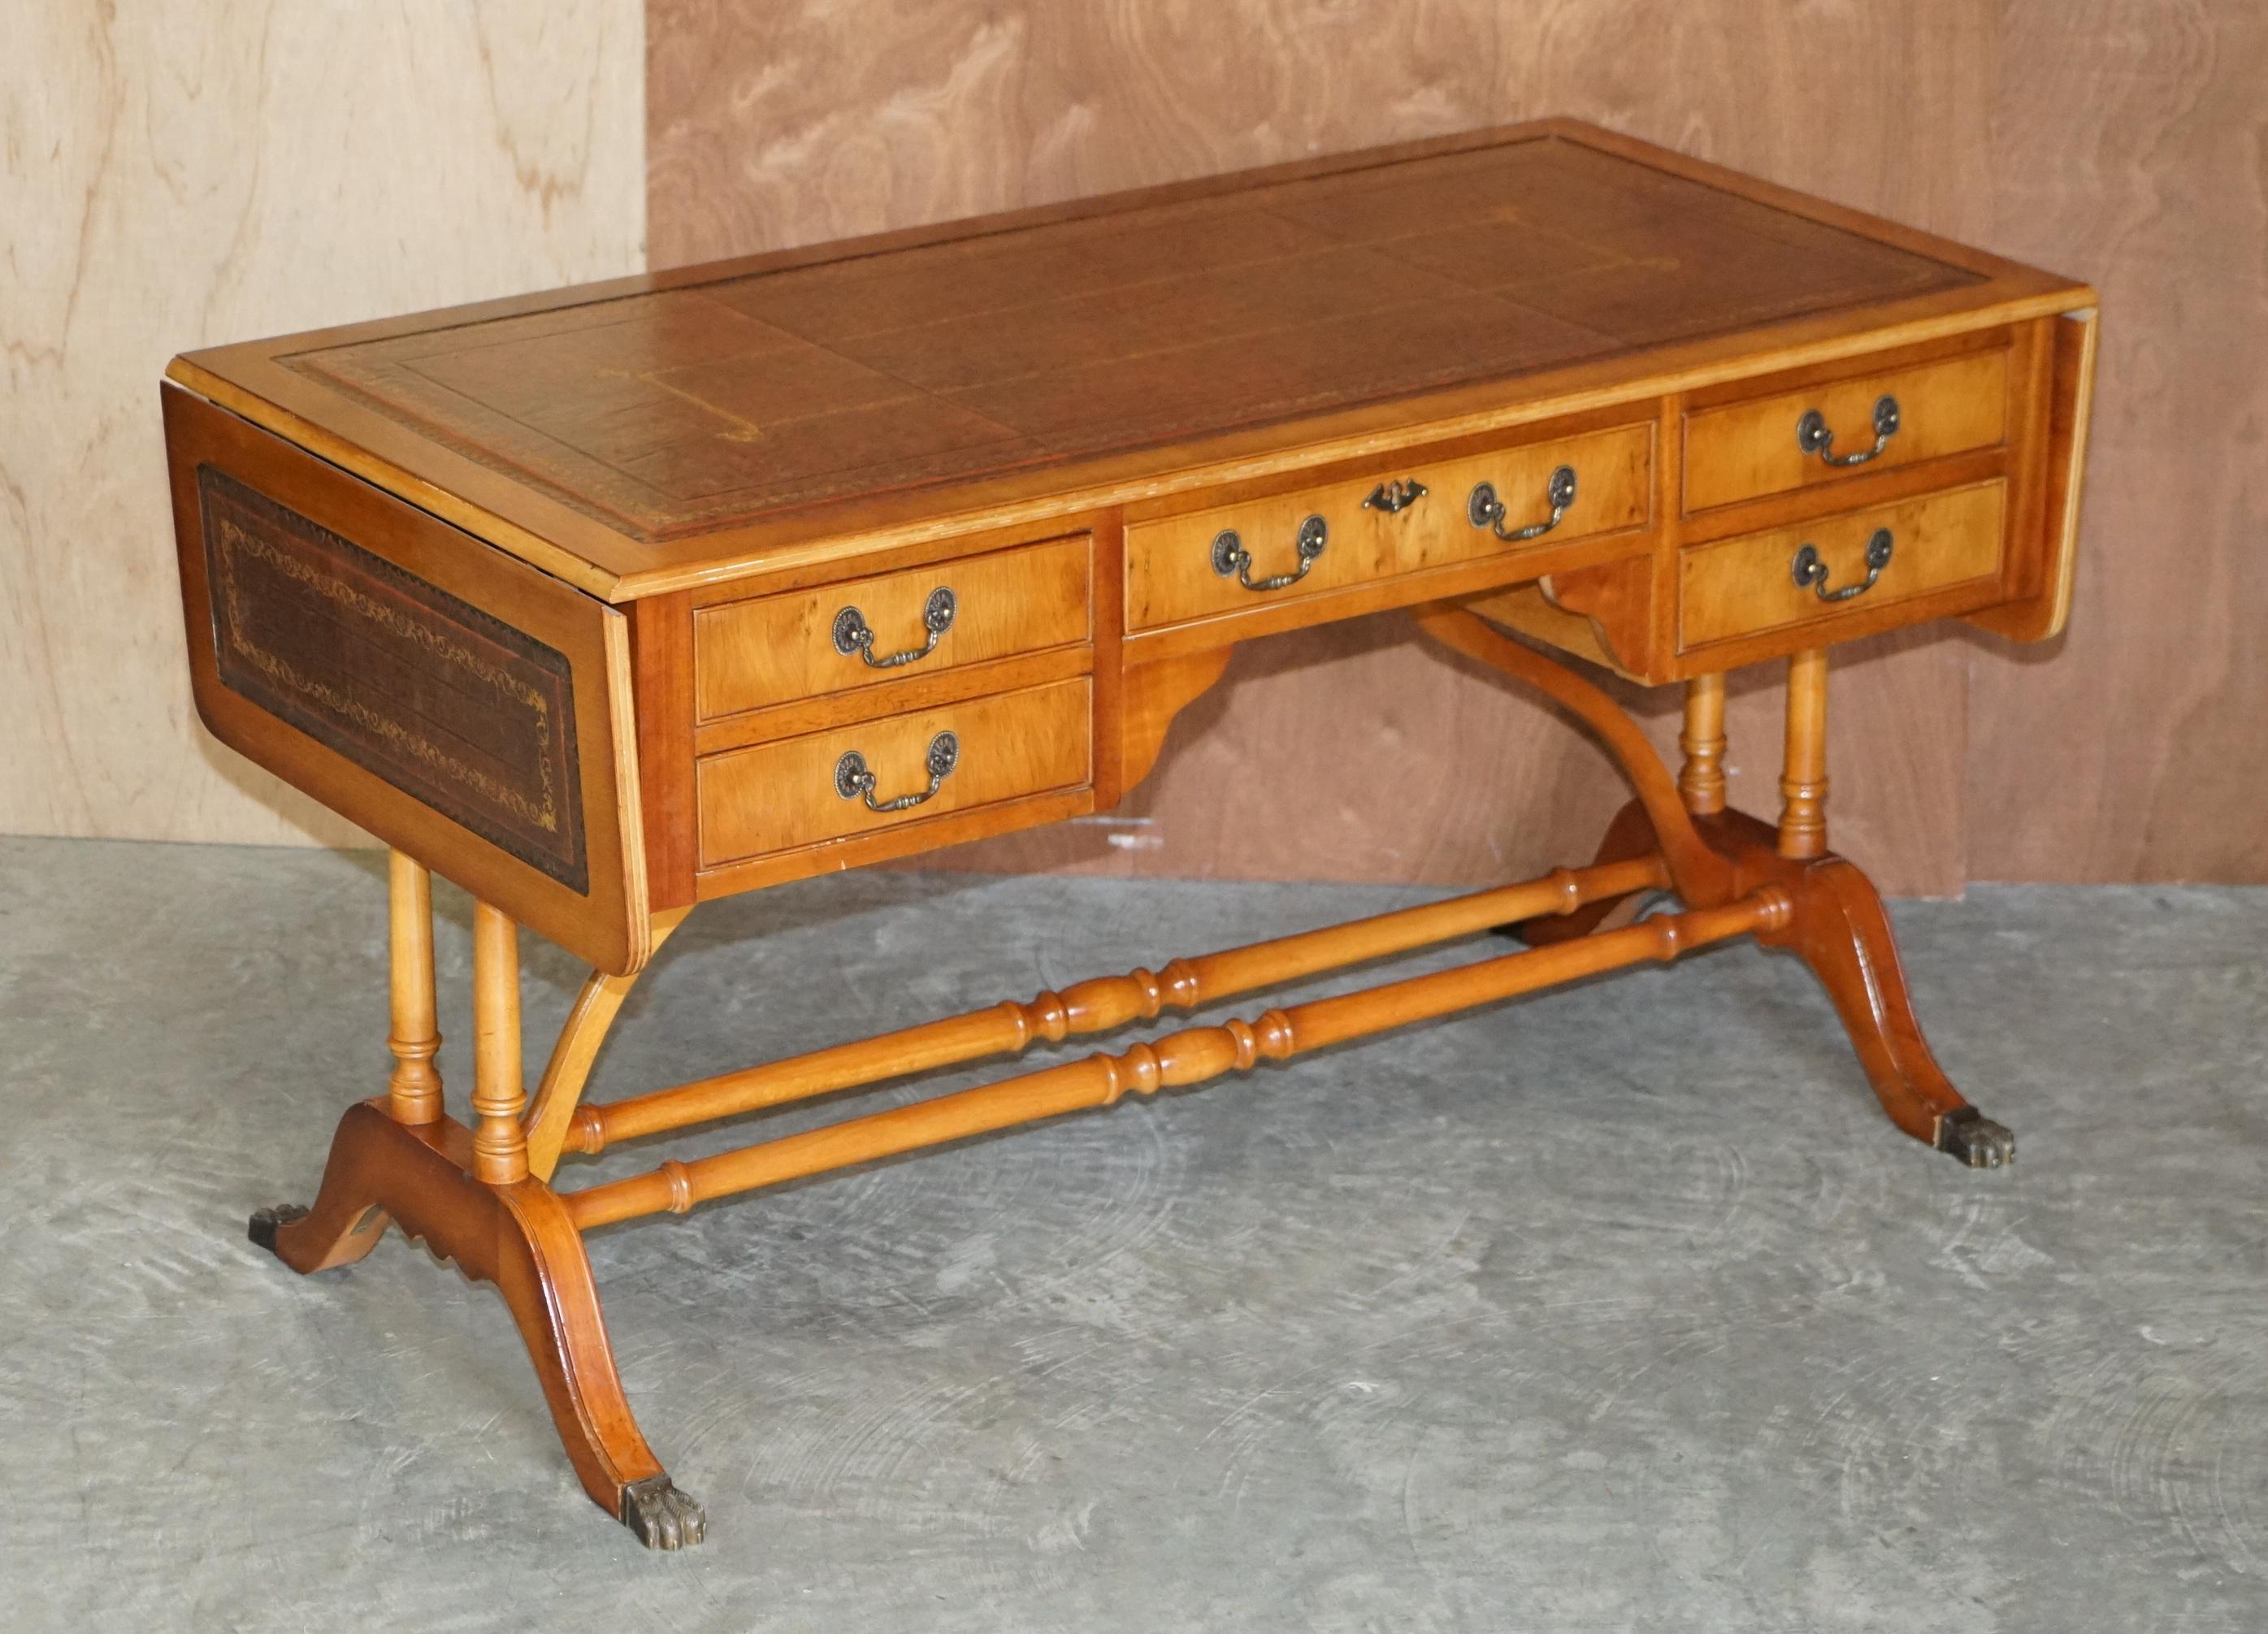 We are delighted to offer for sale this stunning Burr yew wood writing table or desk with extending, gold leaf embossed brown leather top 

A good looking and well made piece, its based on a design for a Regency sofa table however this has the